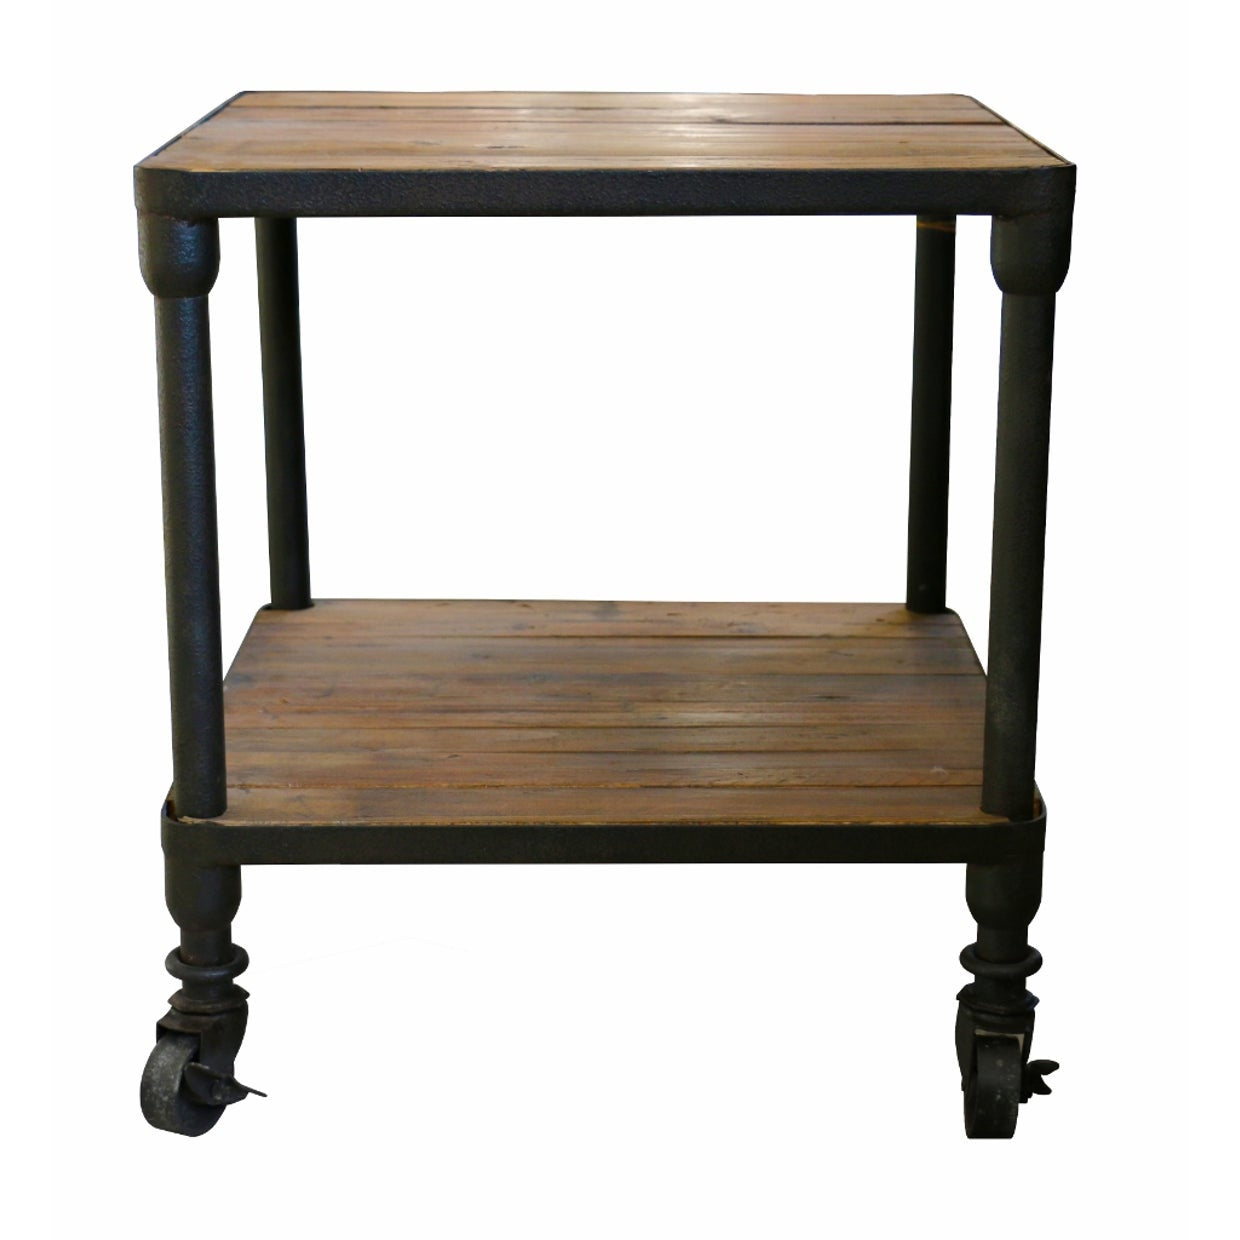 Square Table with Shelf